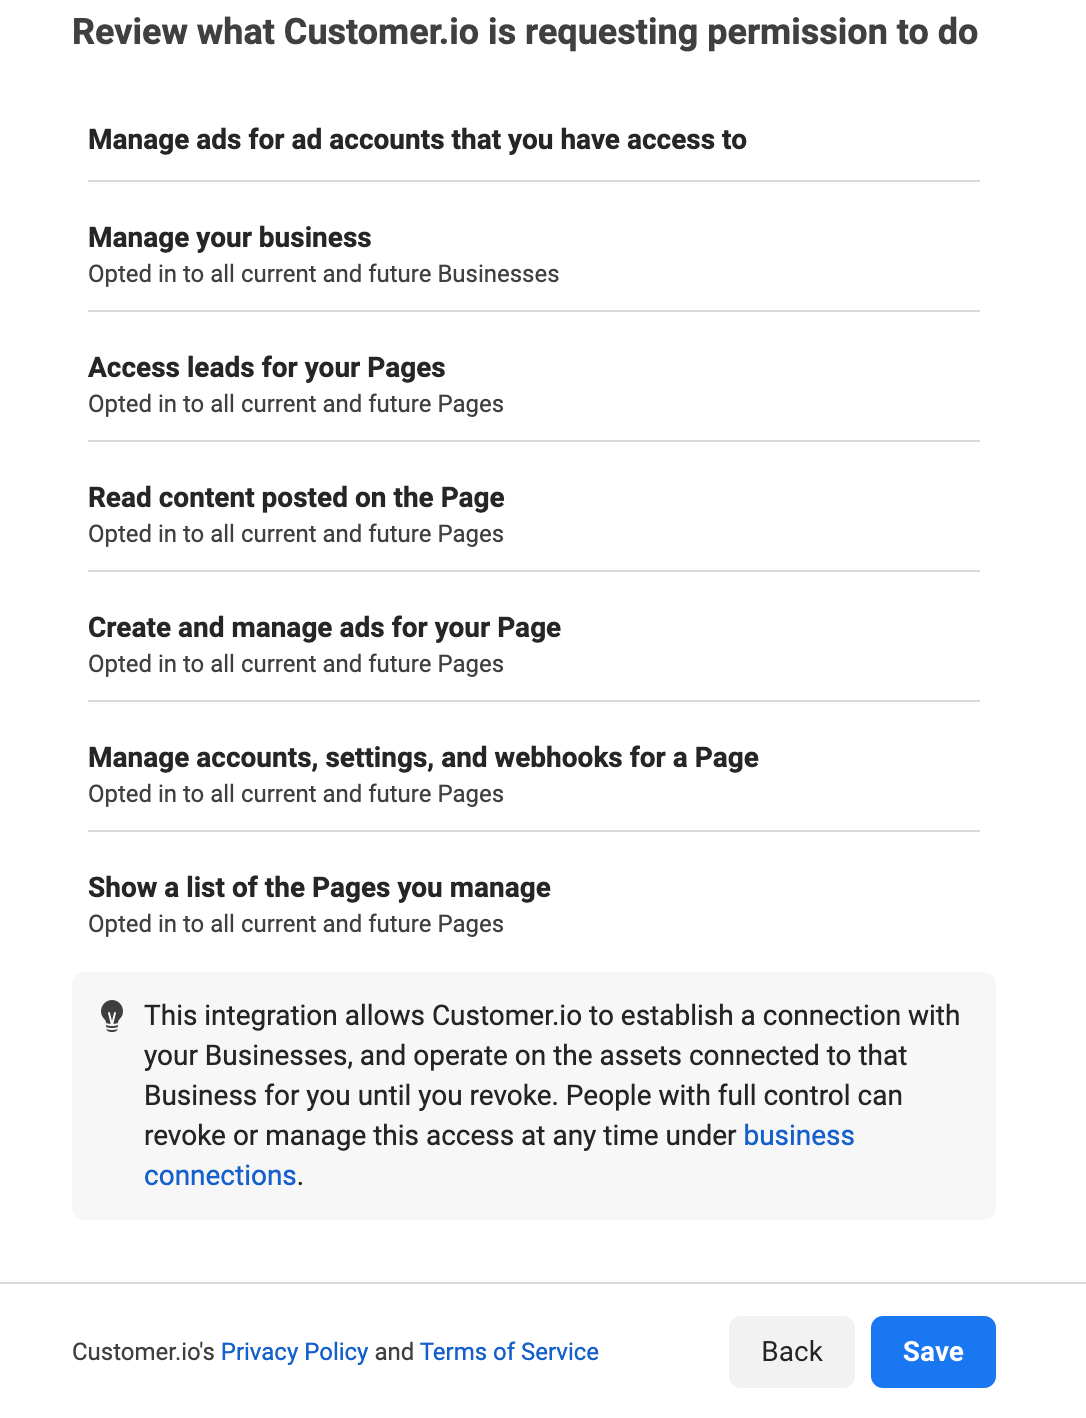 The authorization flow shows the permissions Customer.io needs